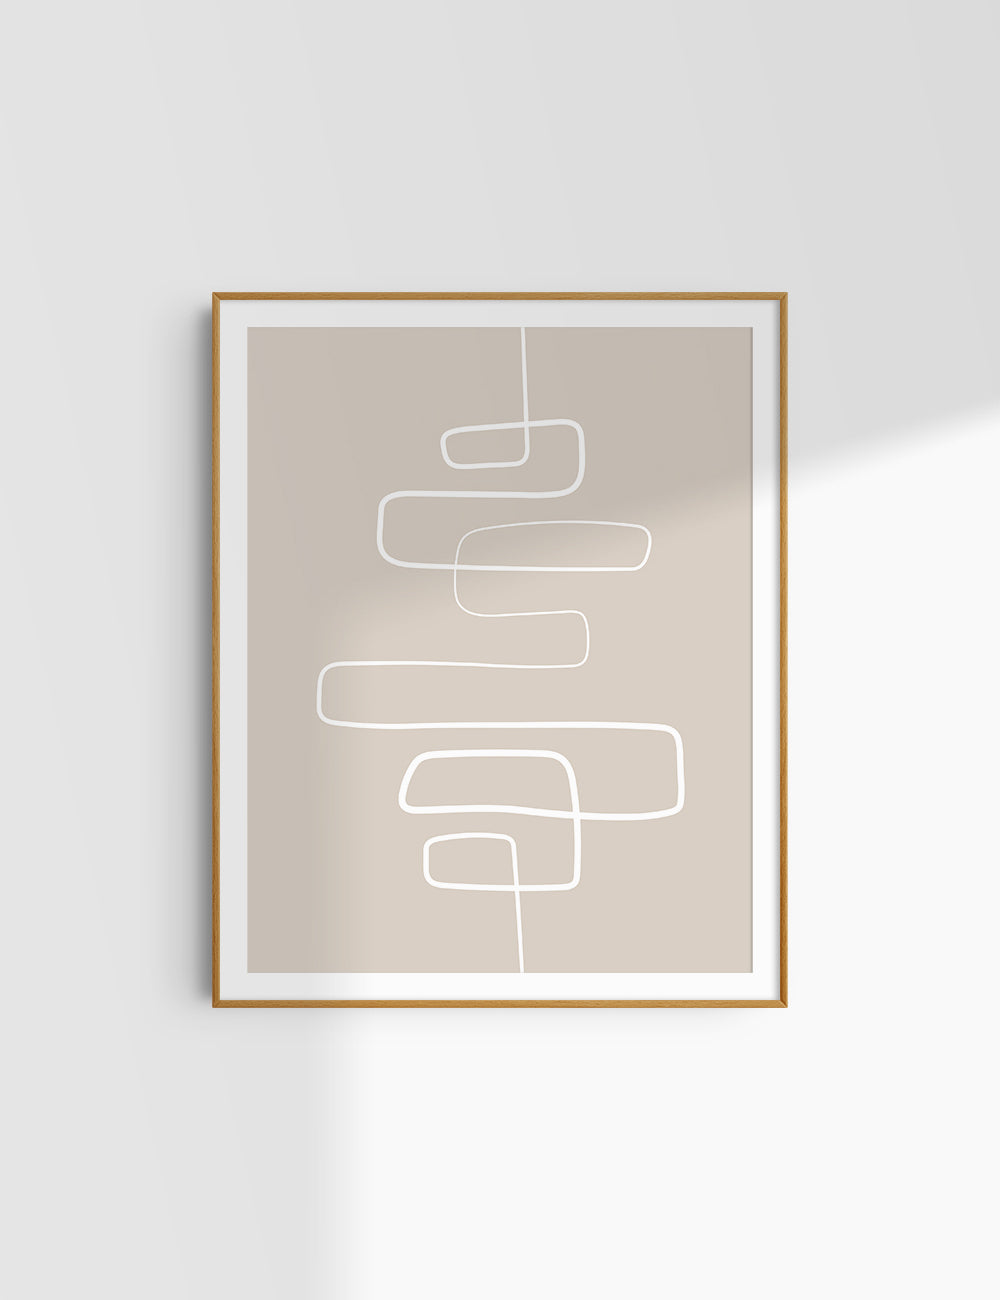 MINIMALIST, ABSTRACT ONE LINE ART. Beige and White. Printable Wall Art Illustration.